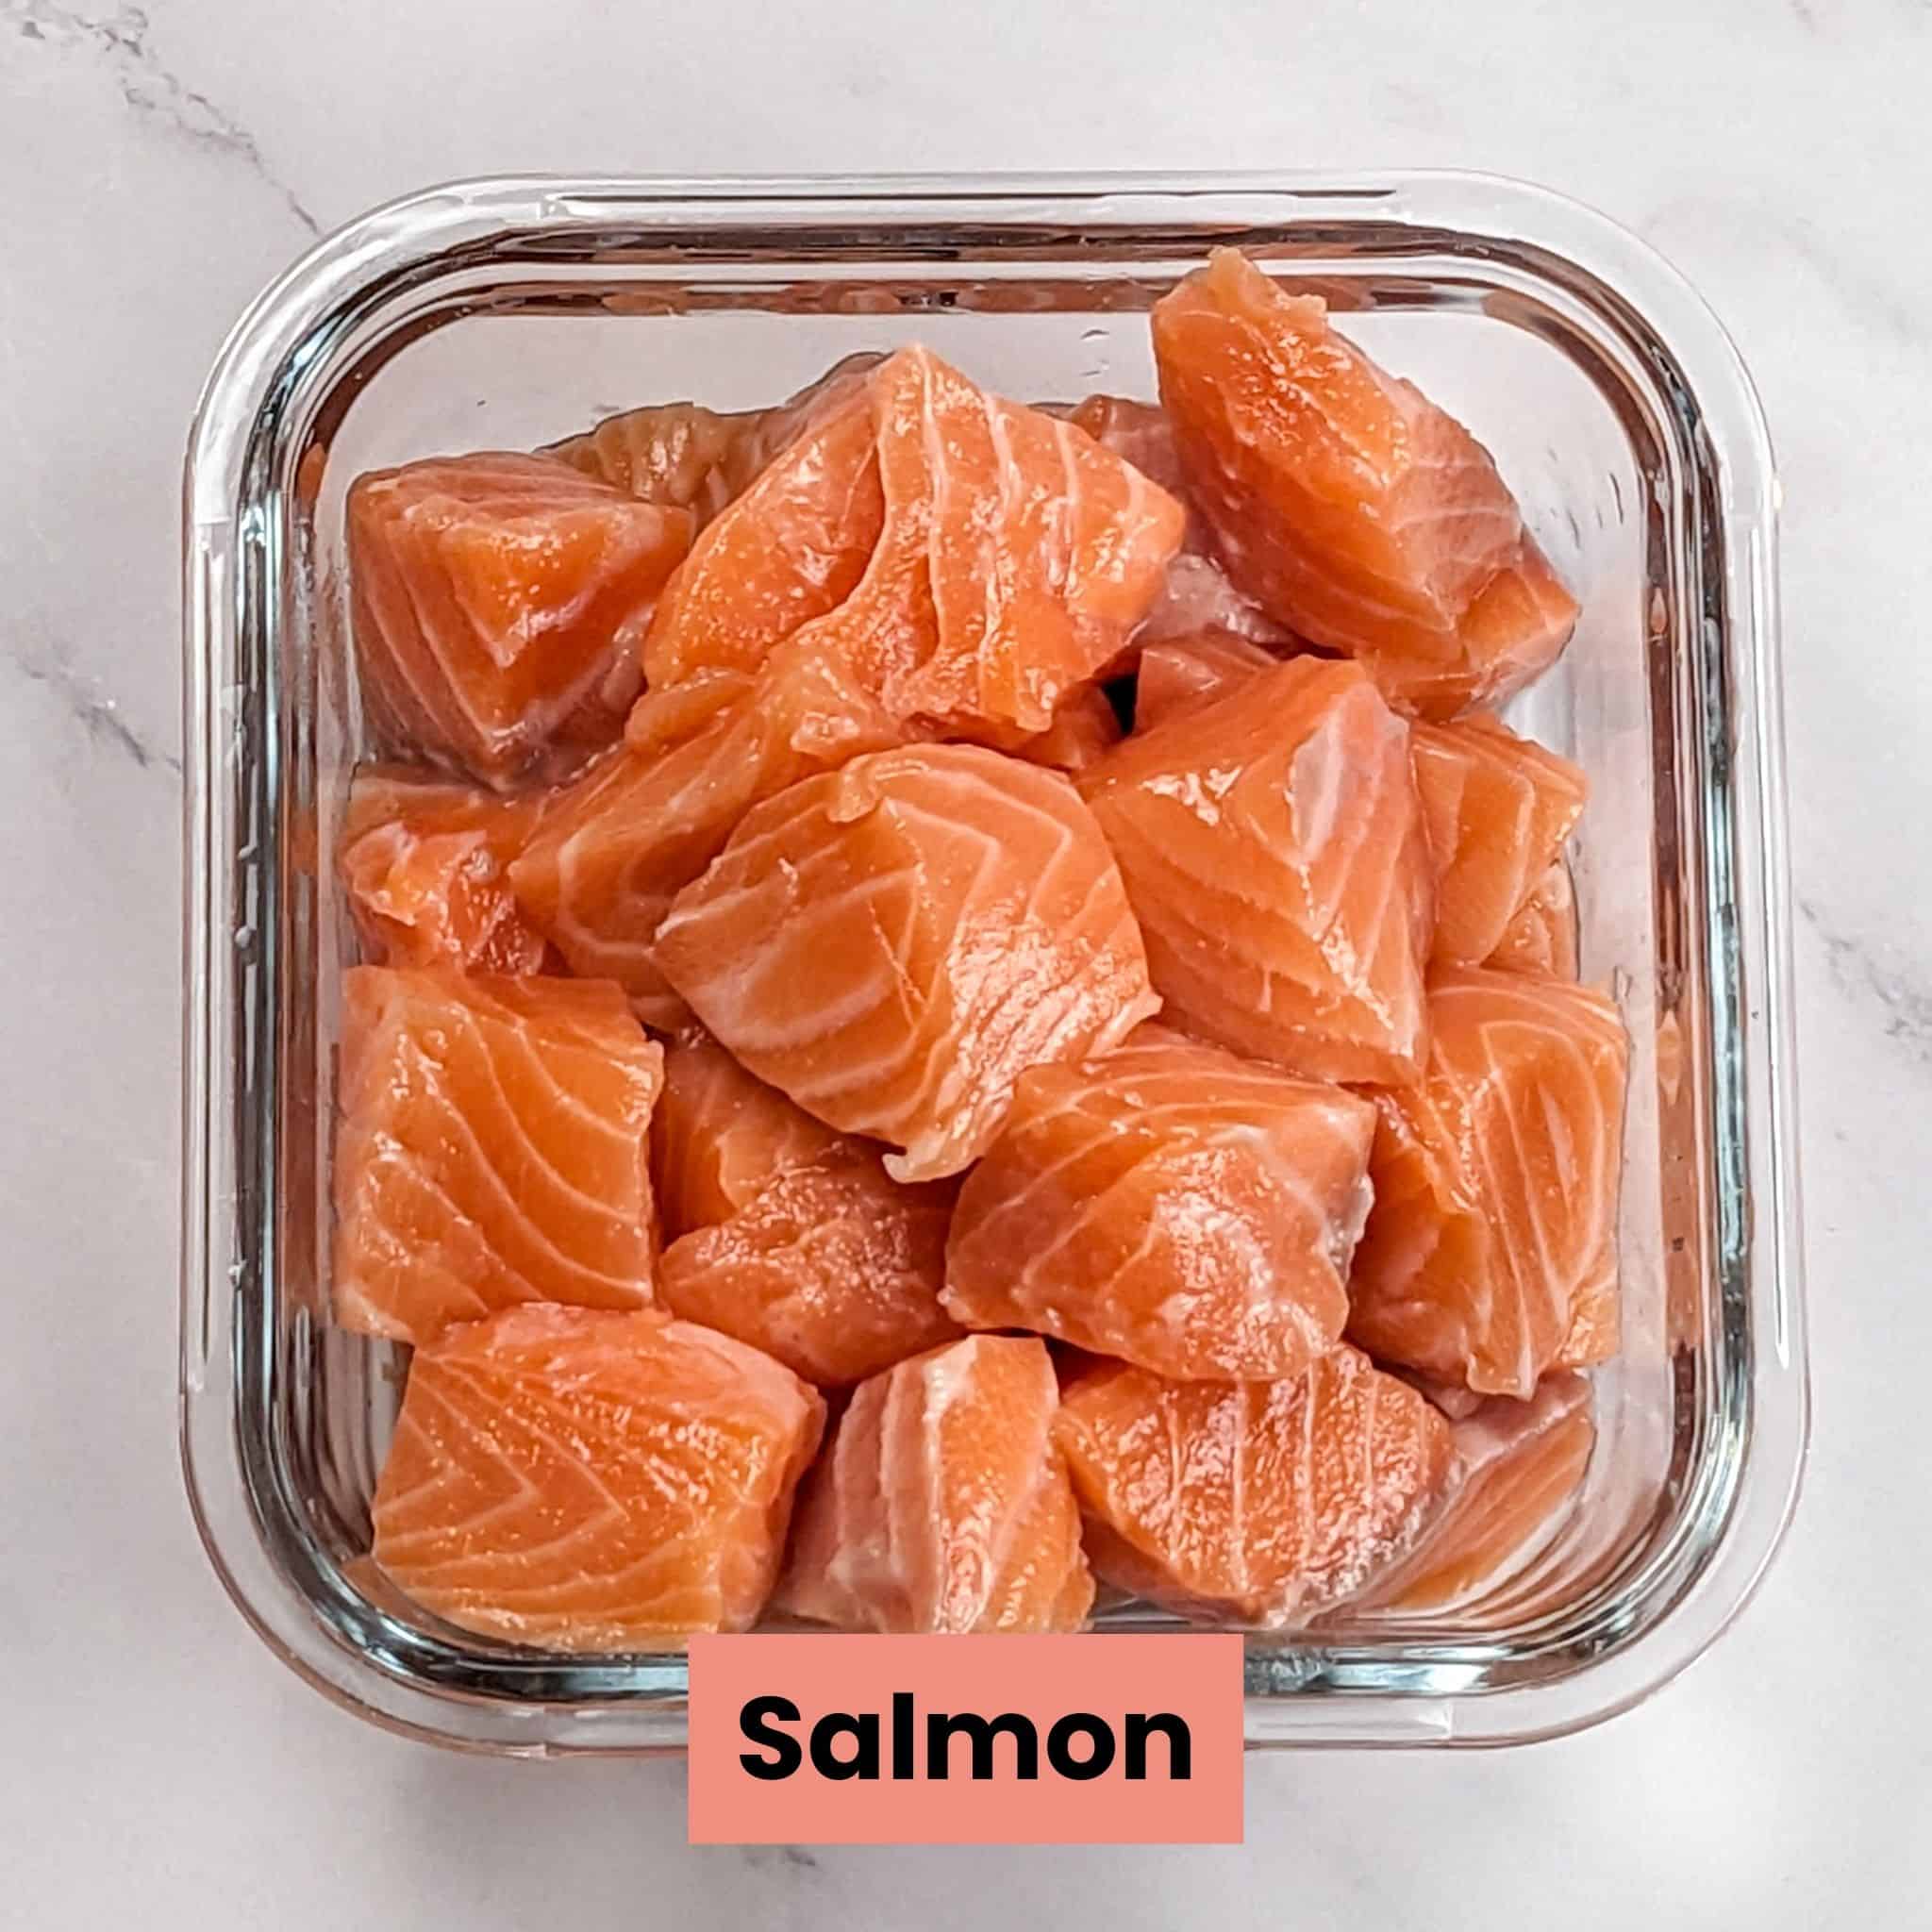 raw salmon cut into large chunks in a square glass container